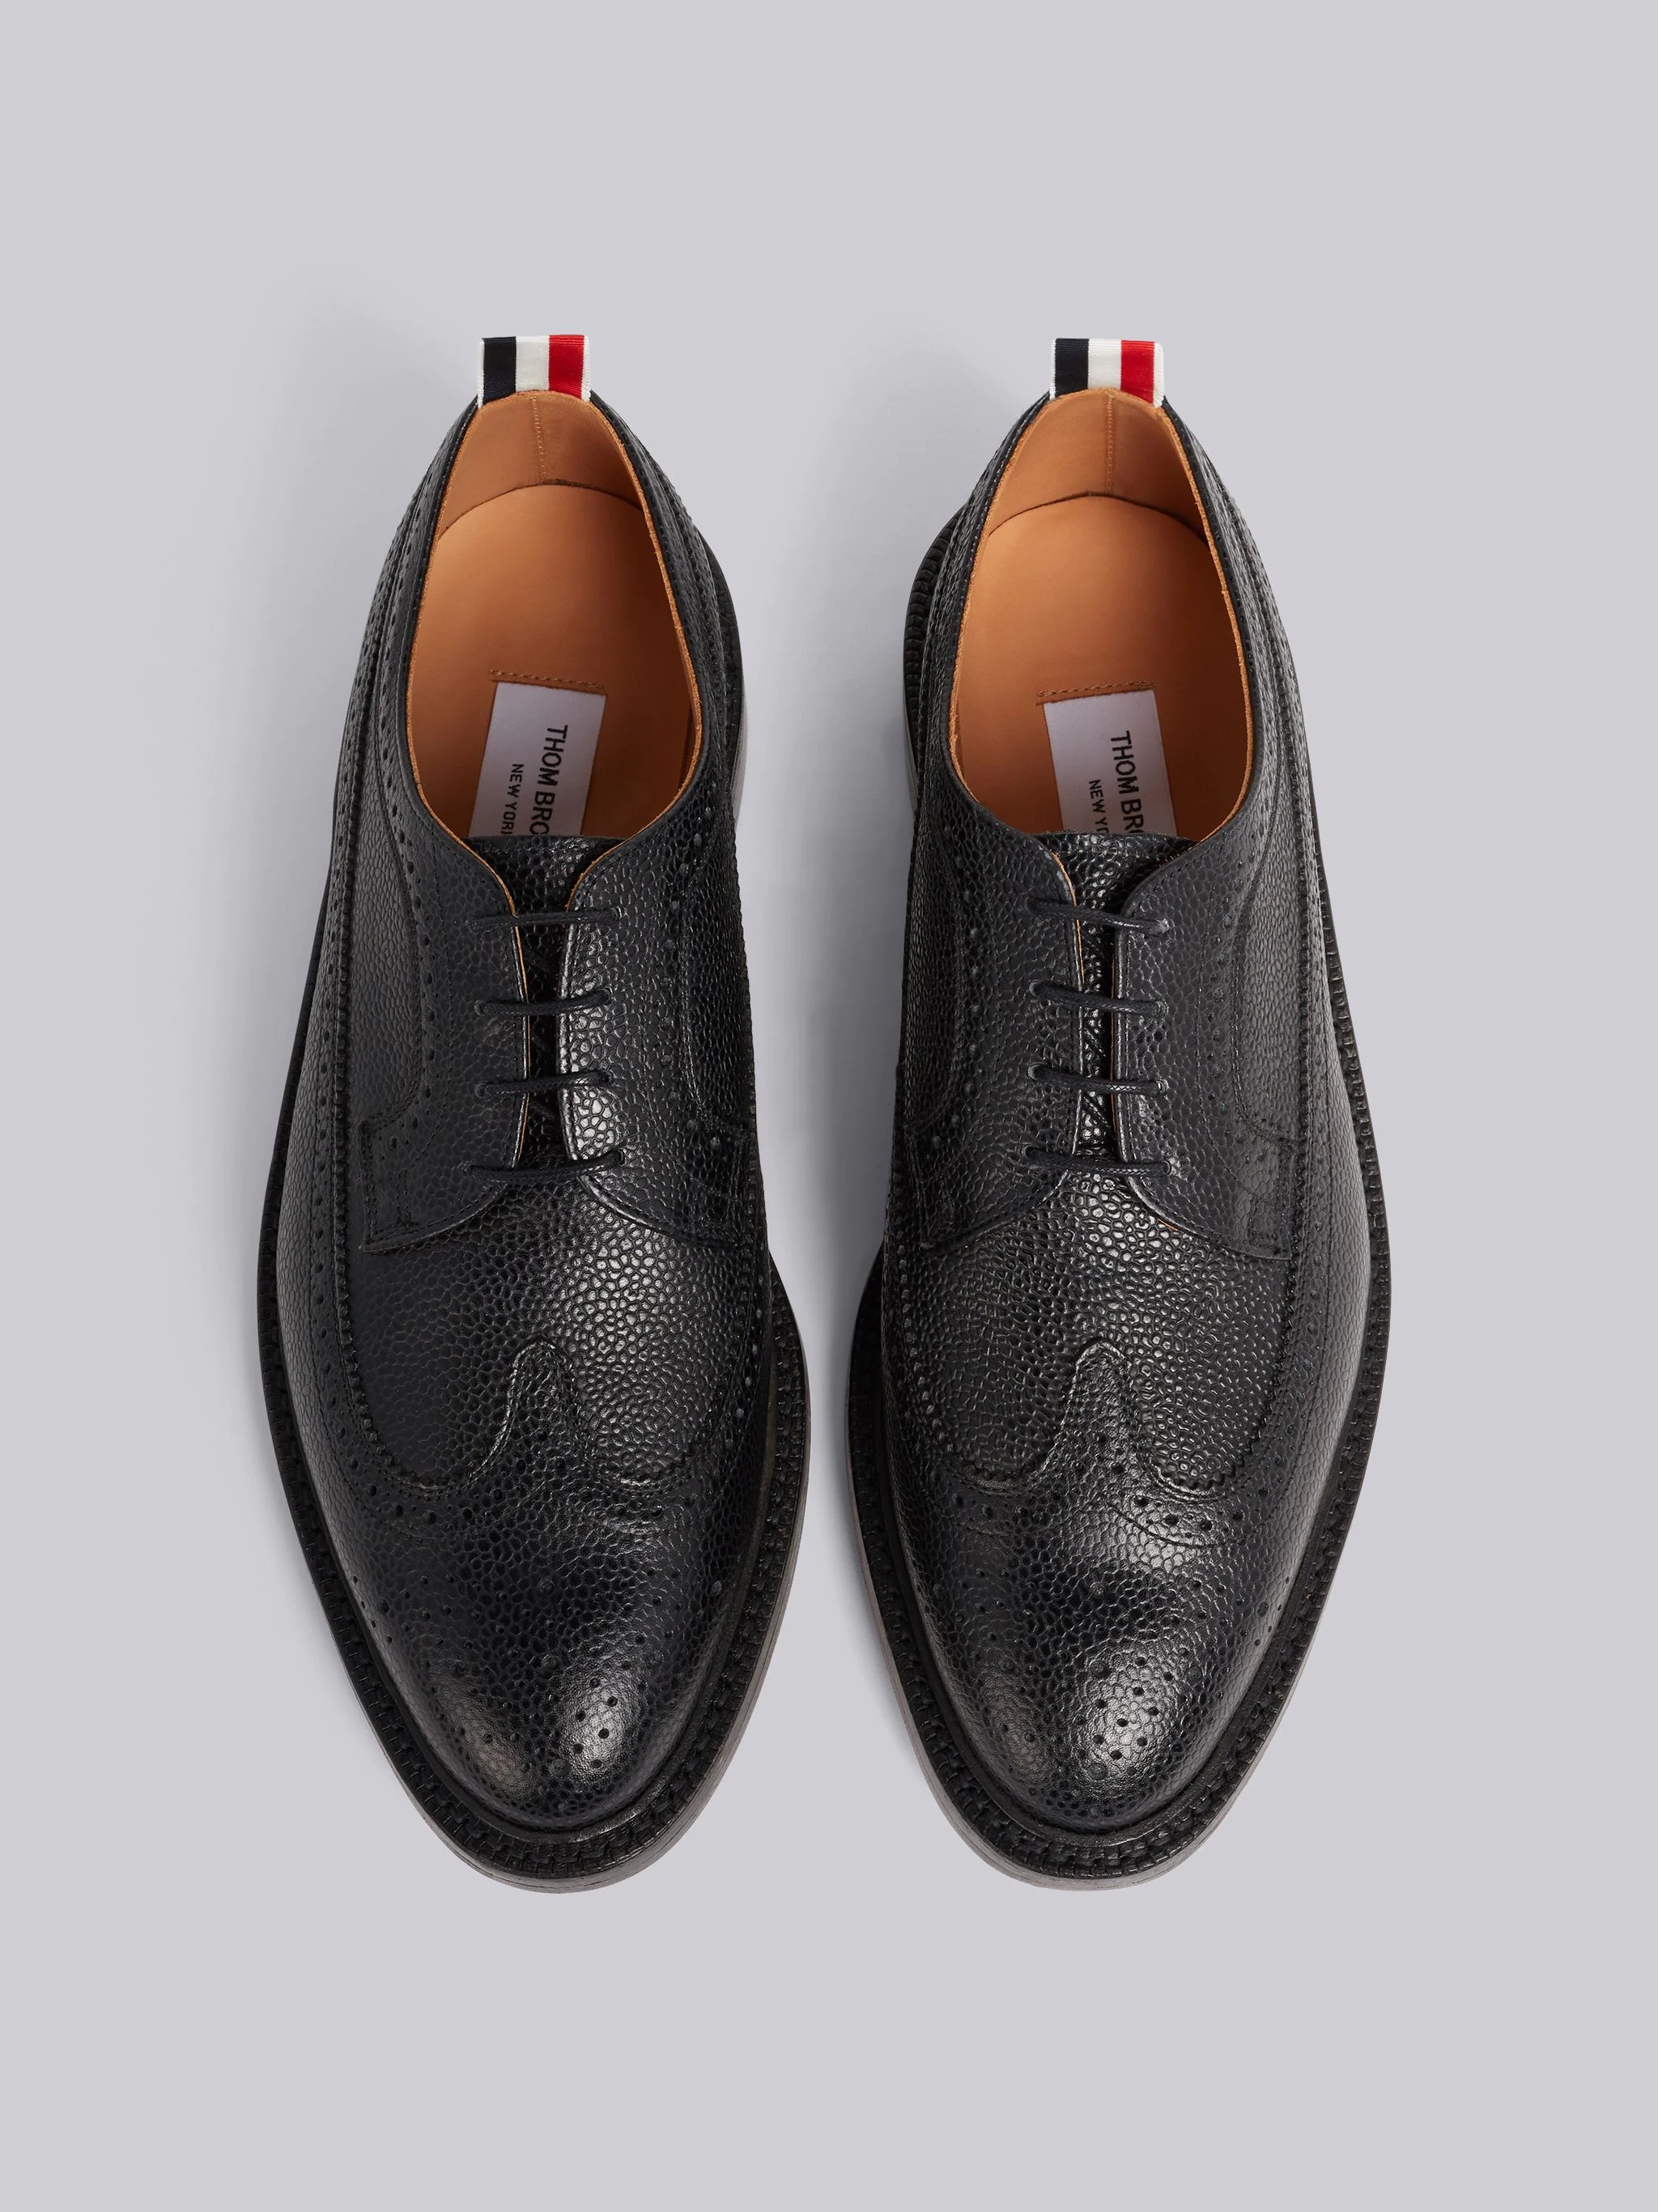 Black Pebble Grain Classic Longwing Brogue With Leather Sole - 4